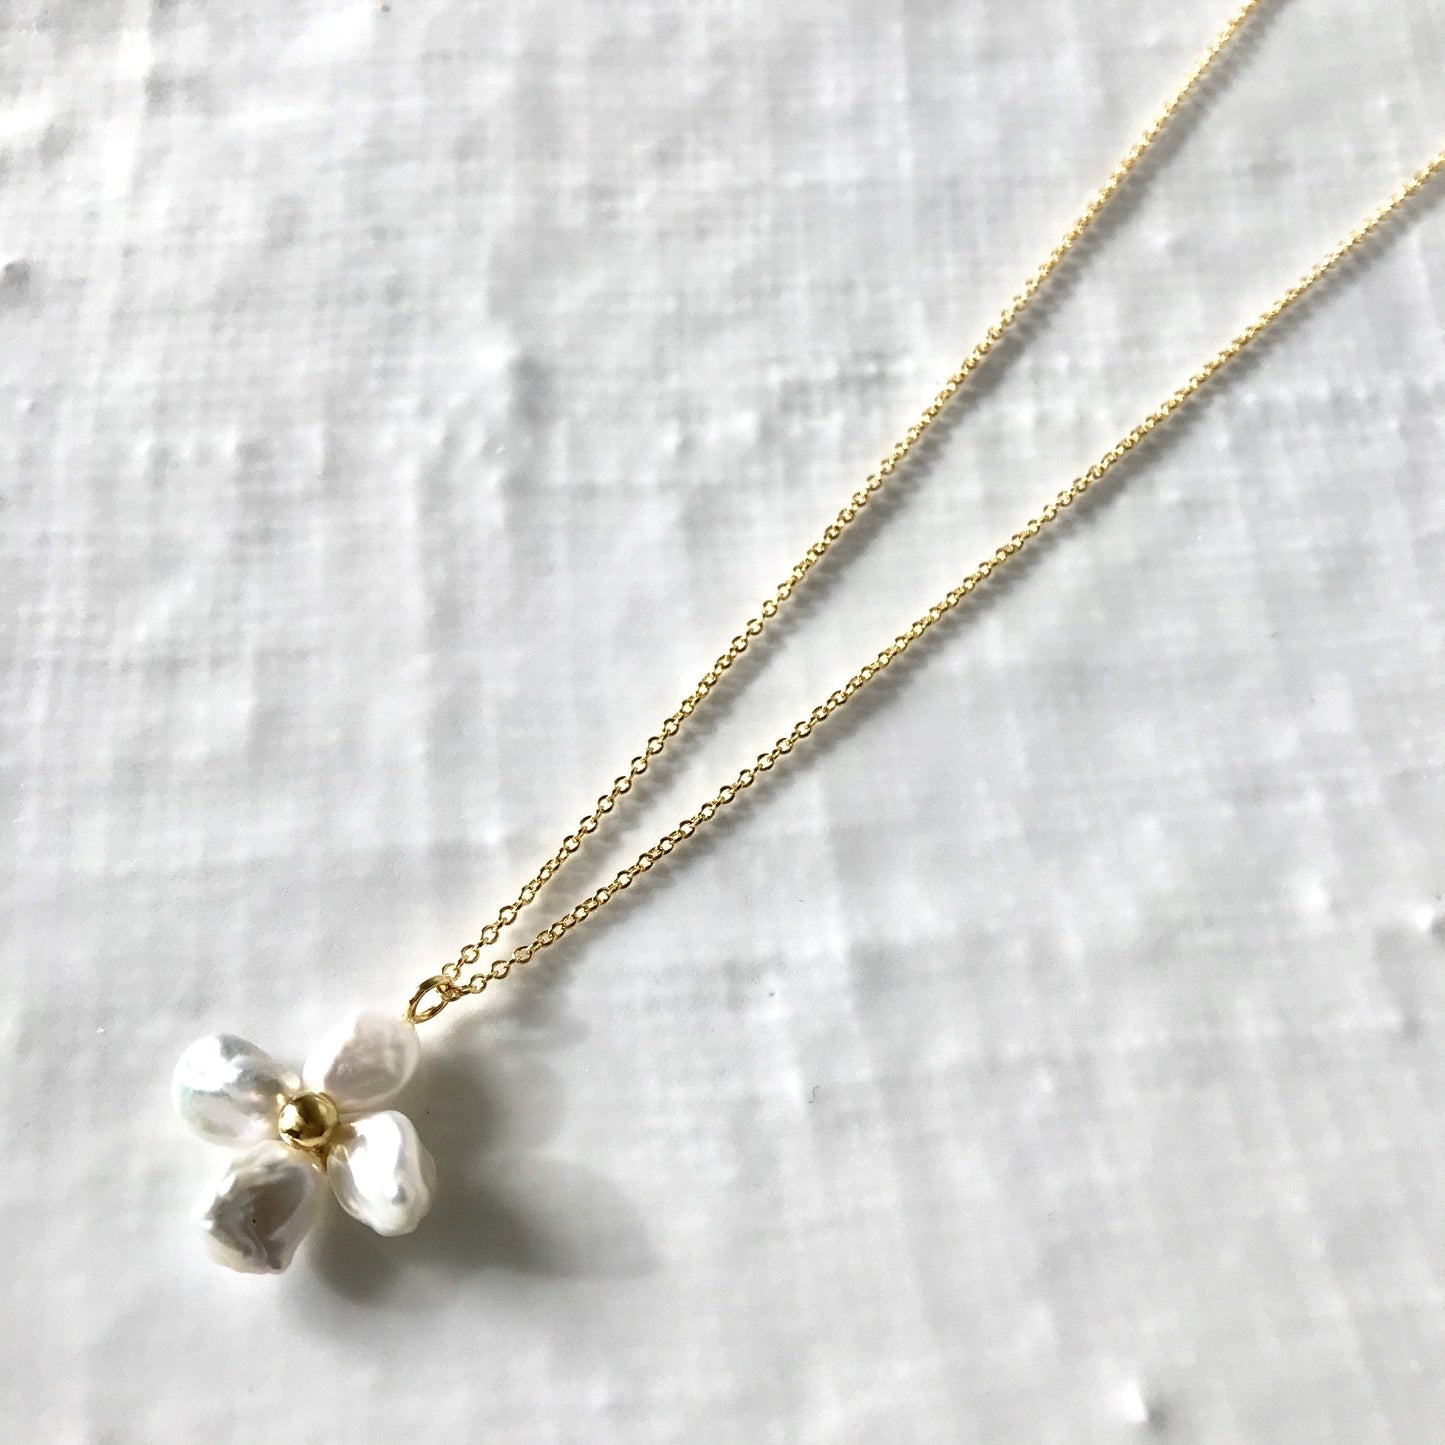 Pearl and gold flower pendant necklace